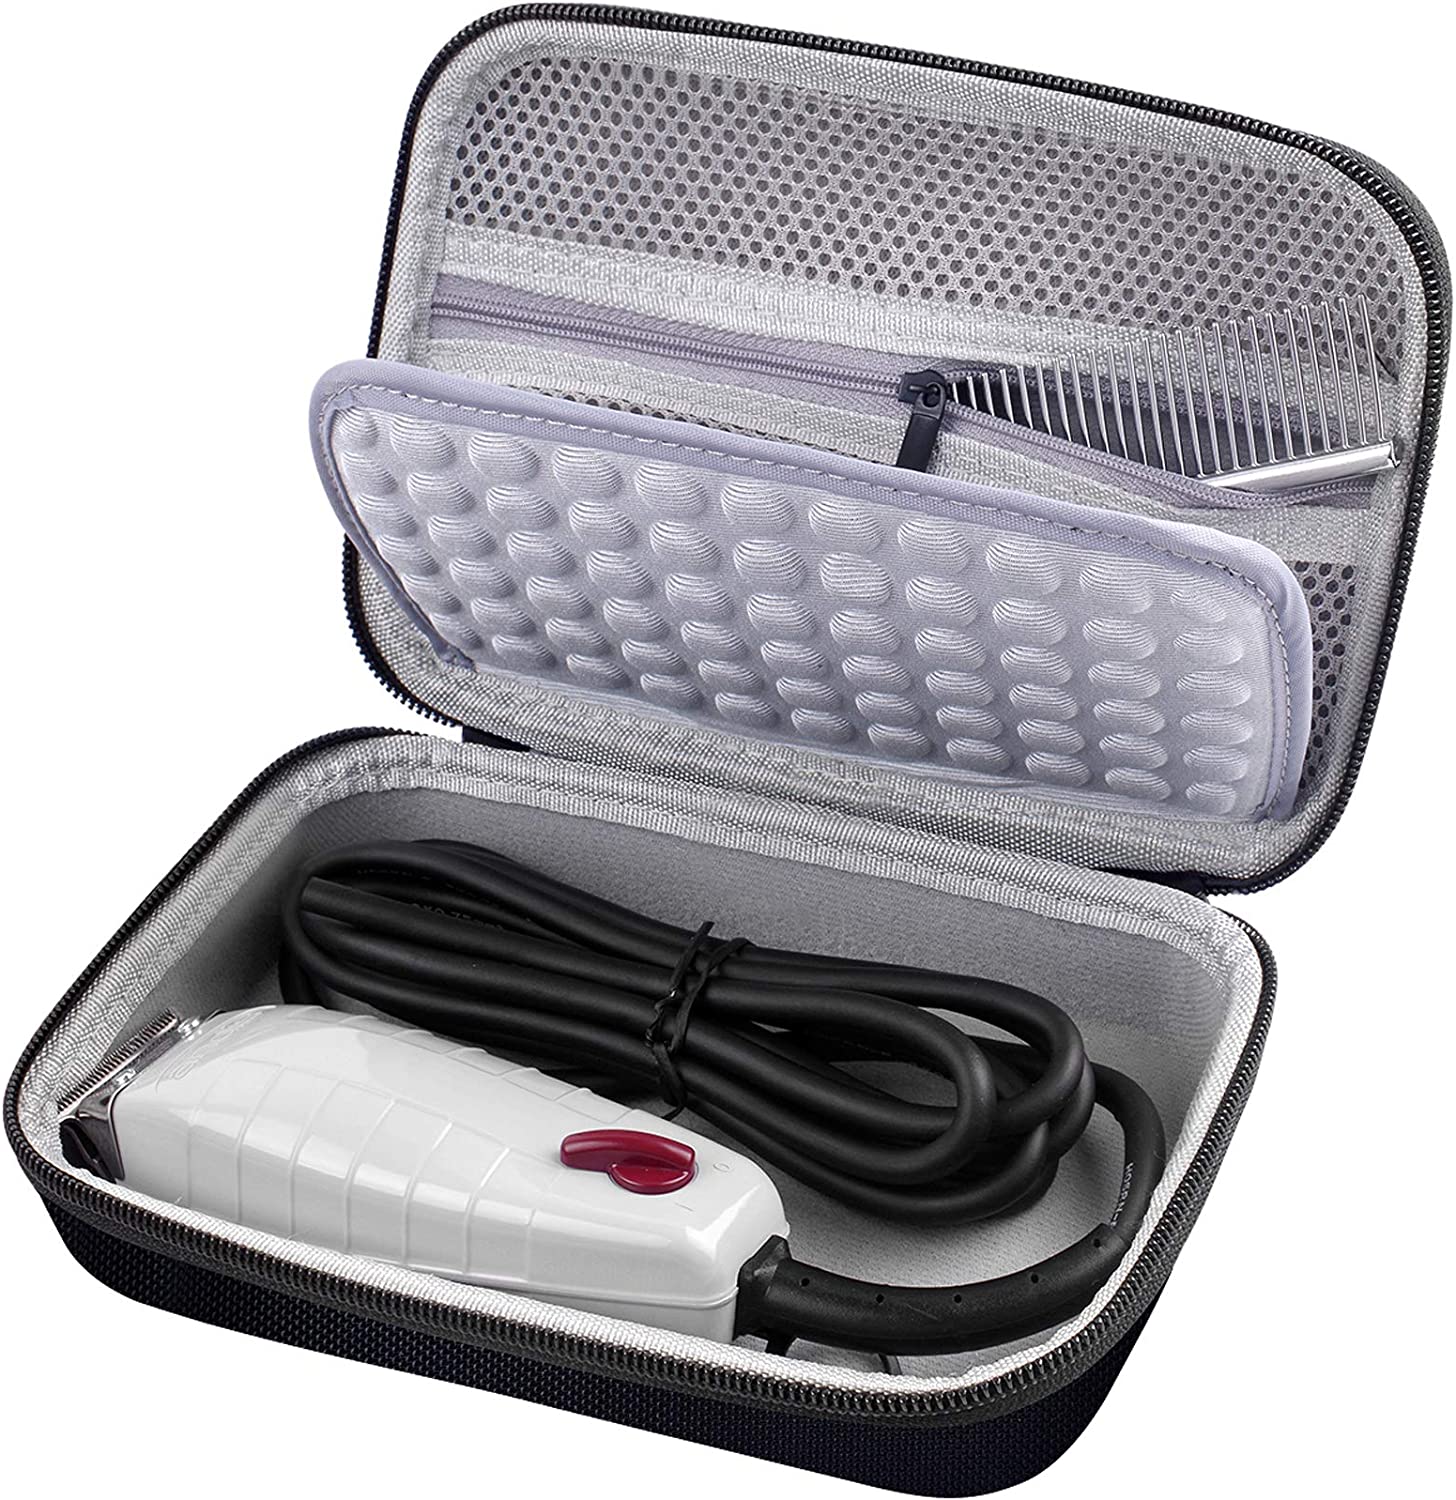 Case for Andis Professional T-Outliner Beard/Hair Trimmer, Model GTO 04710/ 04603/ 04775, with Mesh Pocket for Attachment Set